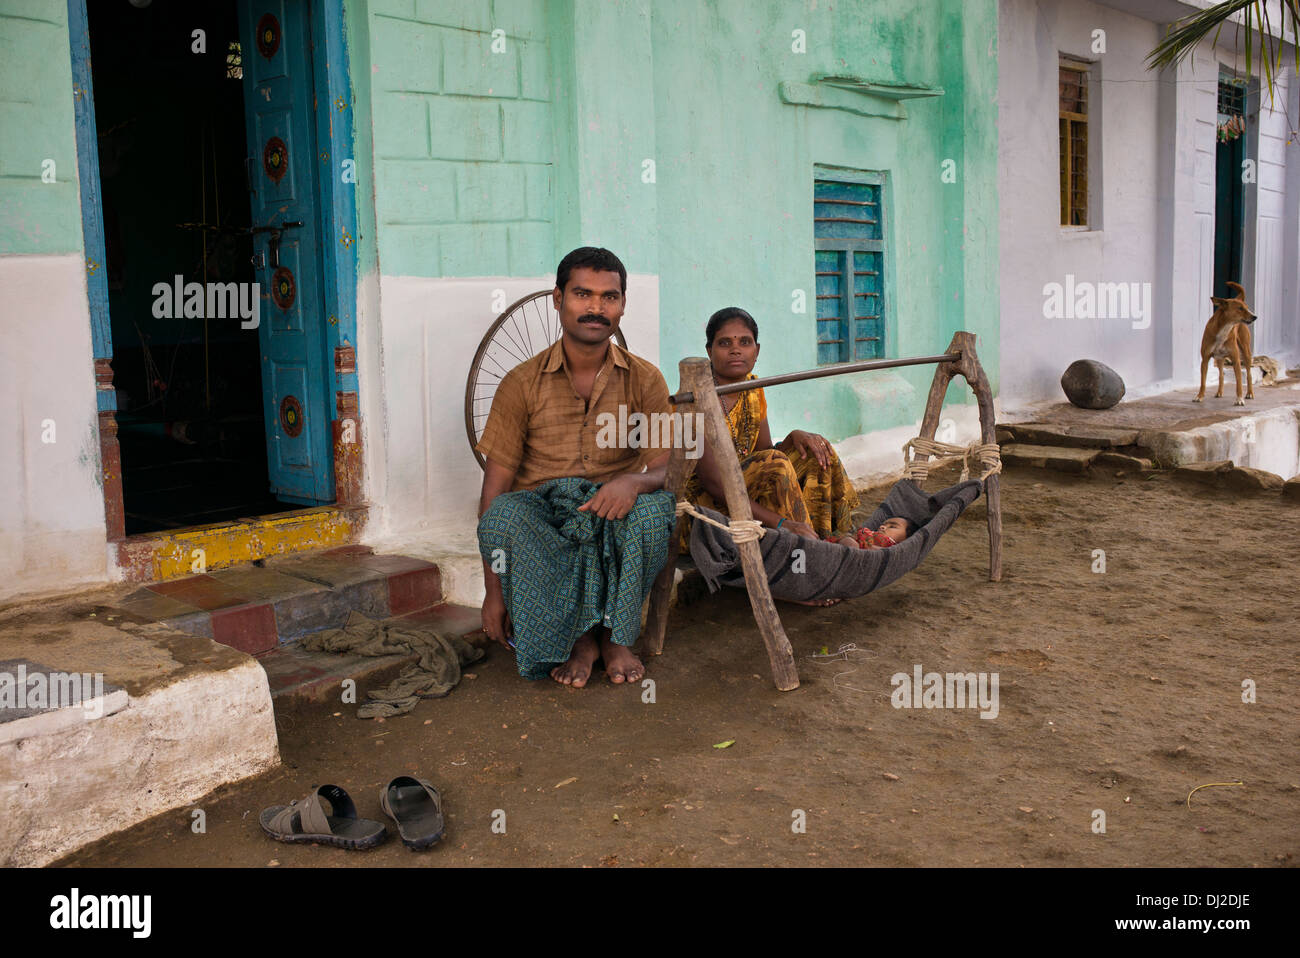 Indian family with baby in a homemade cradle in a rural indian village. Andhra Pradesh, India Stock Photo